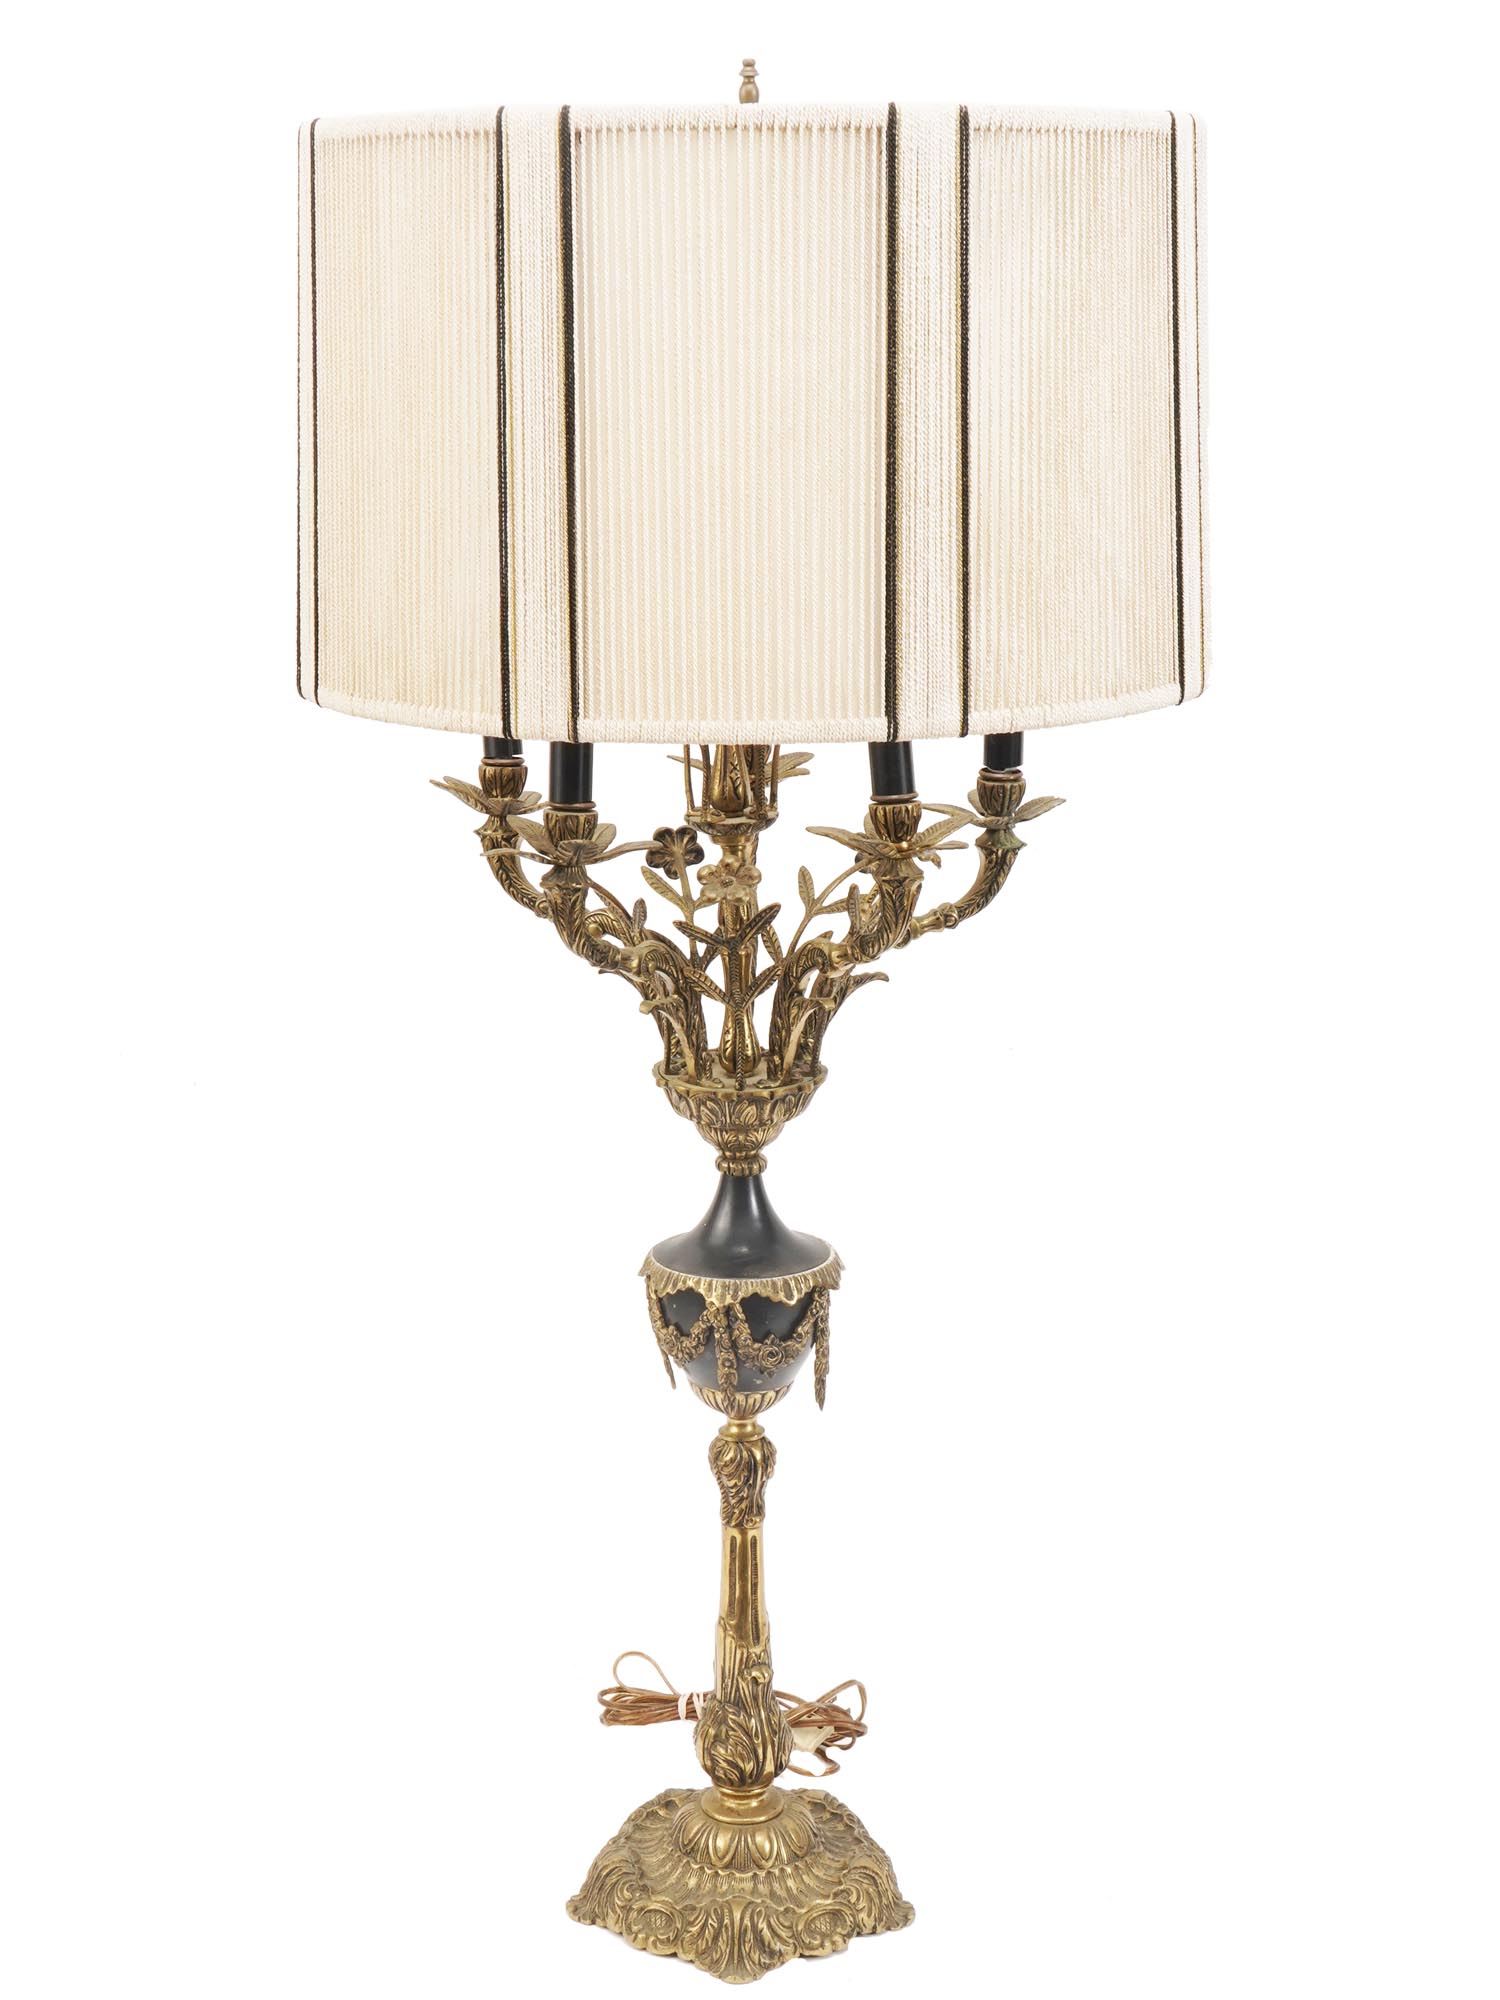 ELECTRIC WALL SCONCE AND TABLE LAMP WITH SHADE PIC-1